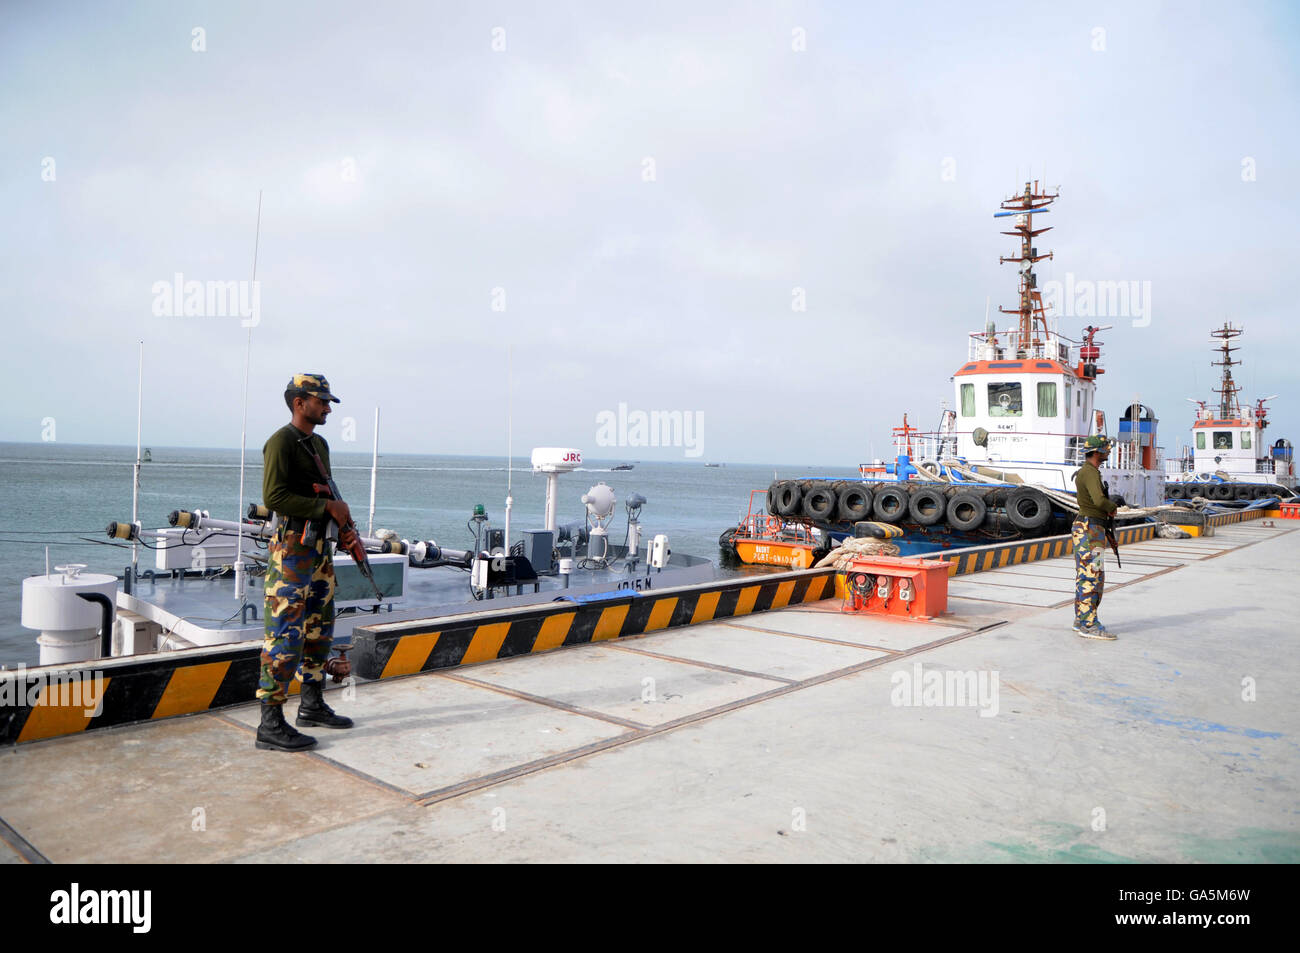 Gwadar. 2nd July, 2016. Pakistani navy soldiers stand guard at Gwadar Port in southwest Pakistan's Gwadar on July 2, 2016. Gwadar Port is a warm-water, deep-sea port situated on the Arabian Sea in Balochistan province of Pakistan. China and Pakistan agreed to build China-Pakistan Economic Corridor(CPEC), a major and pilot project under the Belt and Road Initiative, to connect the Pakistani Gwadar port with Kashgar city in China's Xinjiang Uygur Autonomous Region. © Ahmad Kamal/Xinhua/Alamy Live News Stock Photo